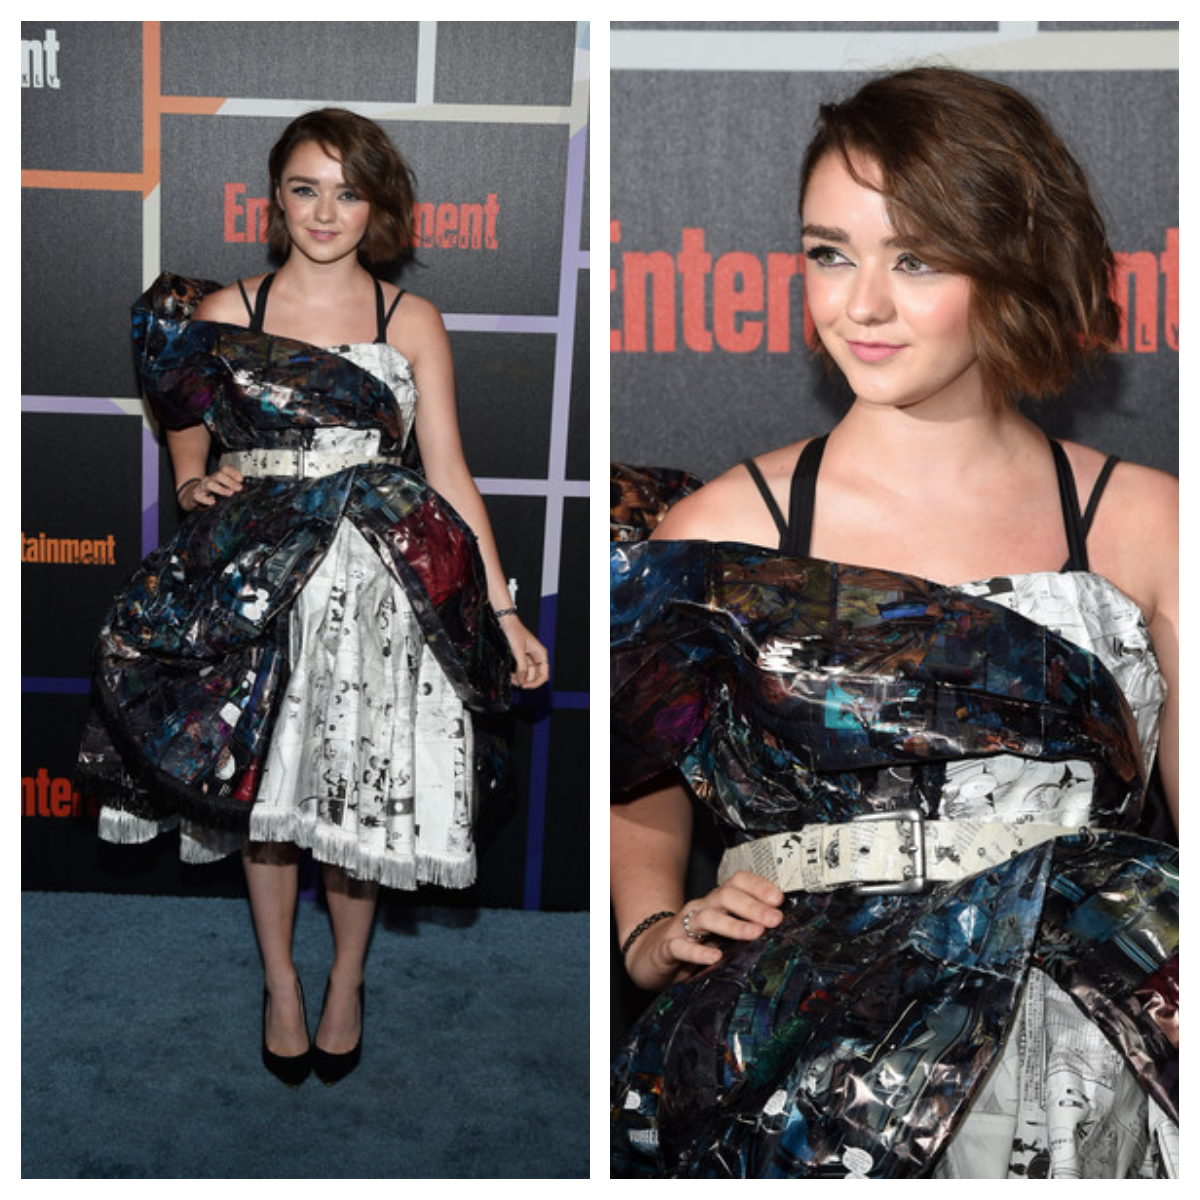  Maisie Williams @ Getty Images